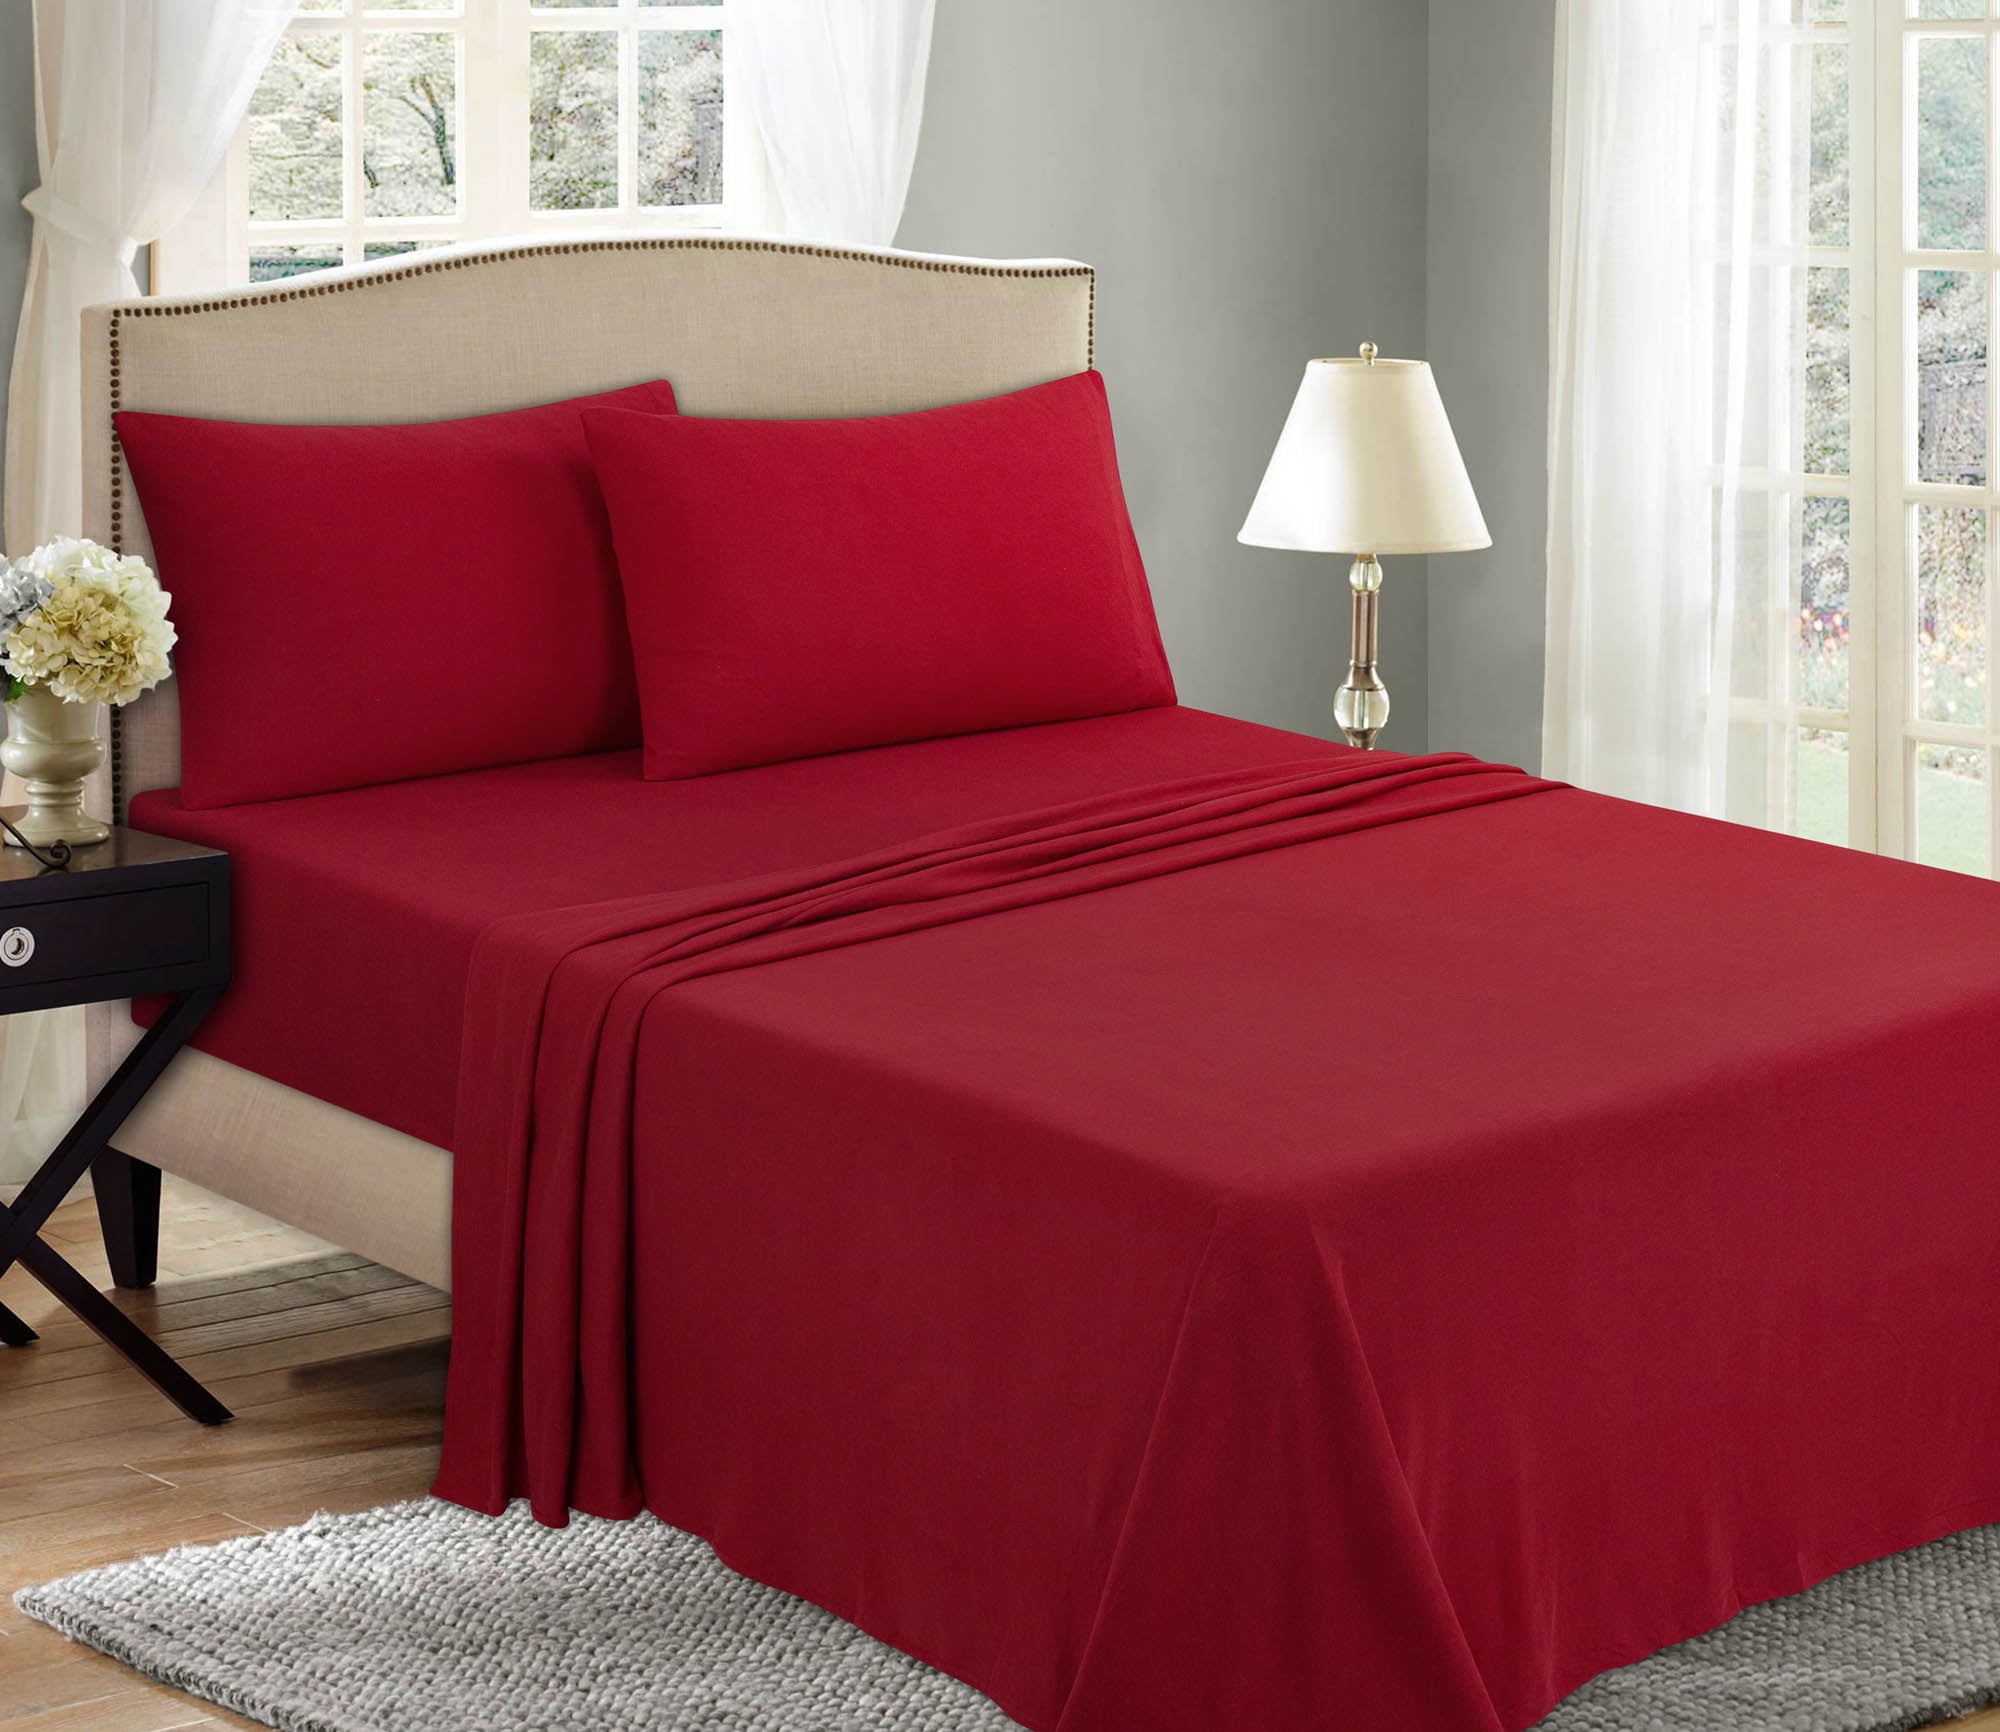 jersey knit bed sheets